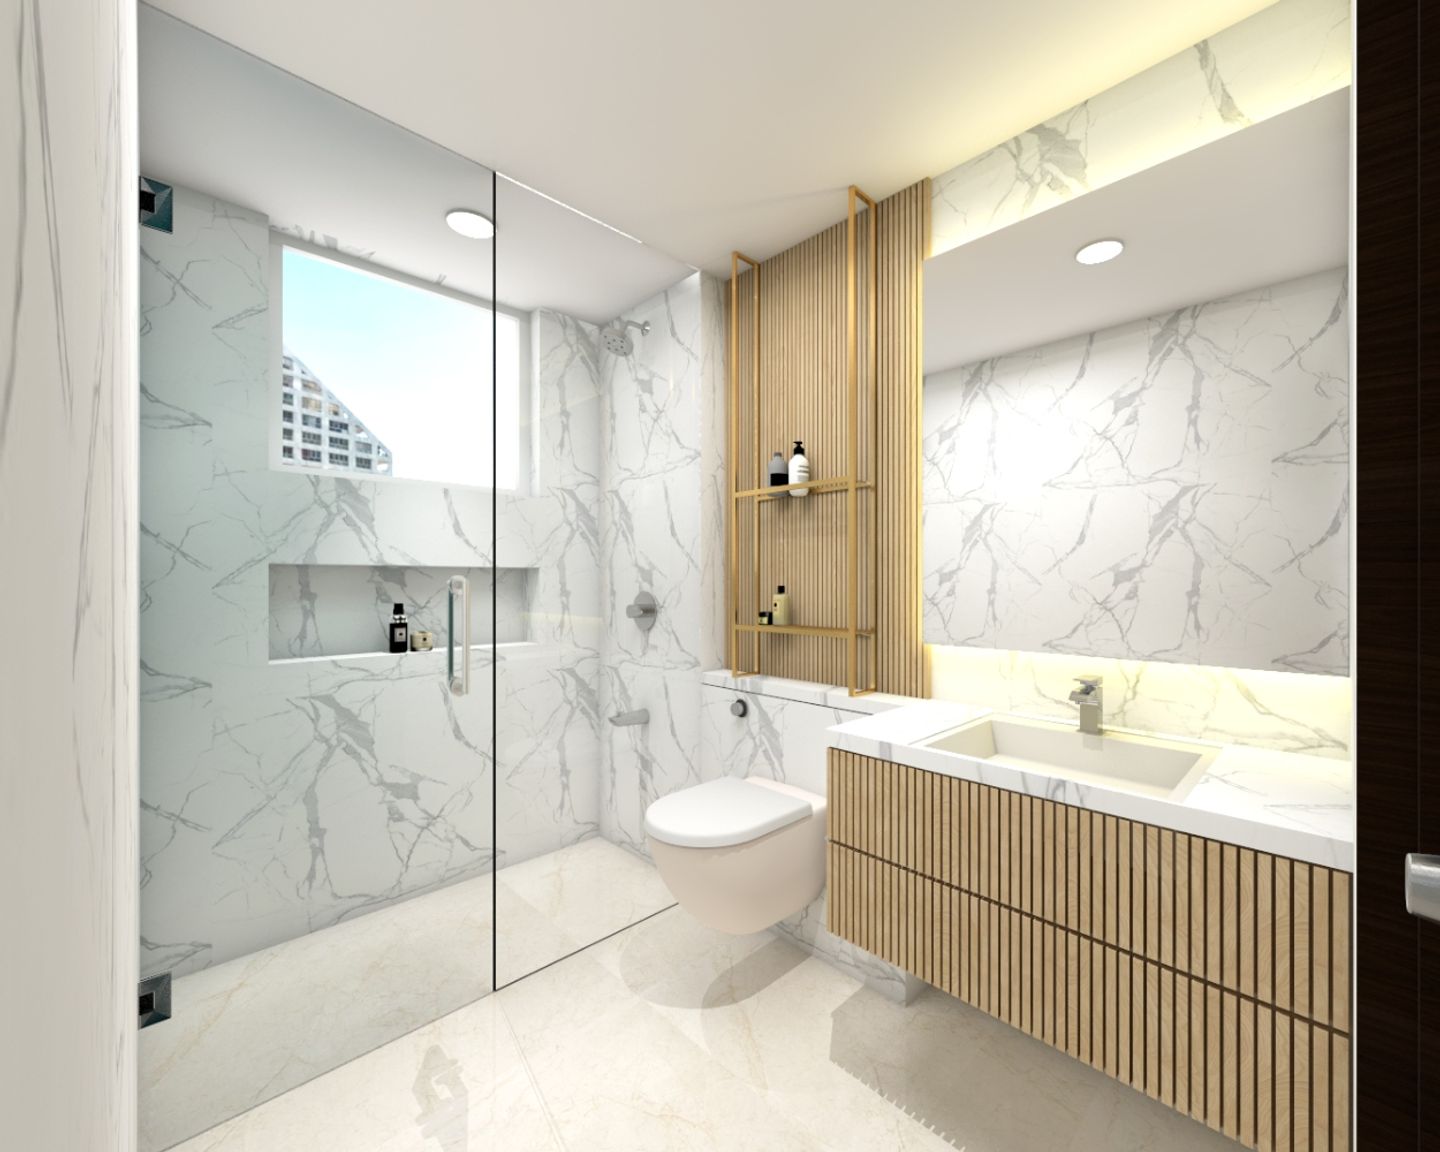 8X5 Ft White Marble Bathroom Design With Wooden Wall Panel - Livspace